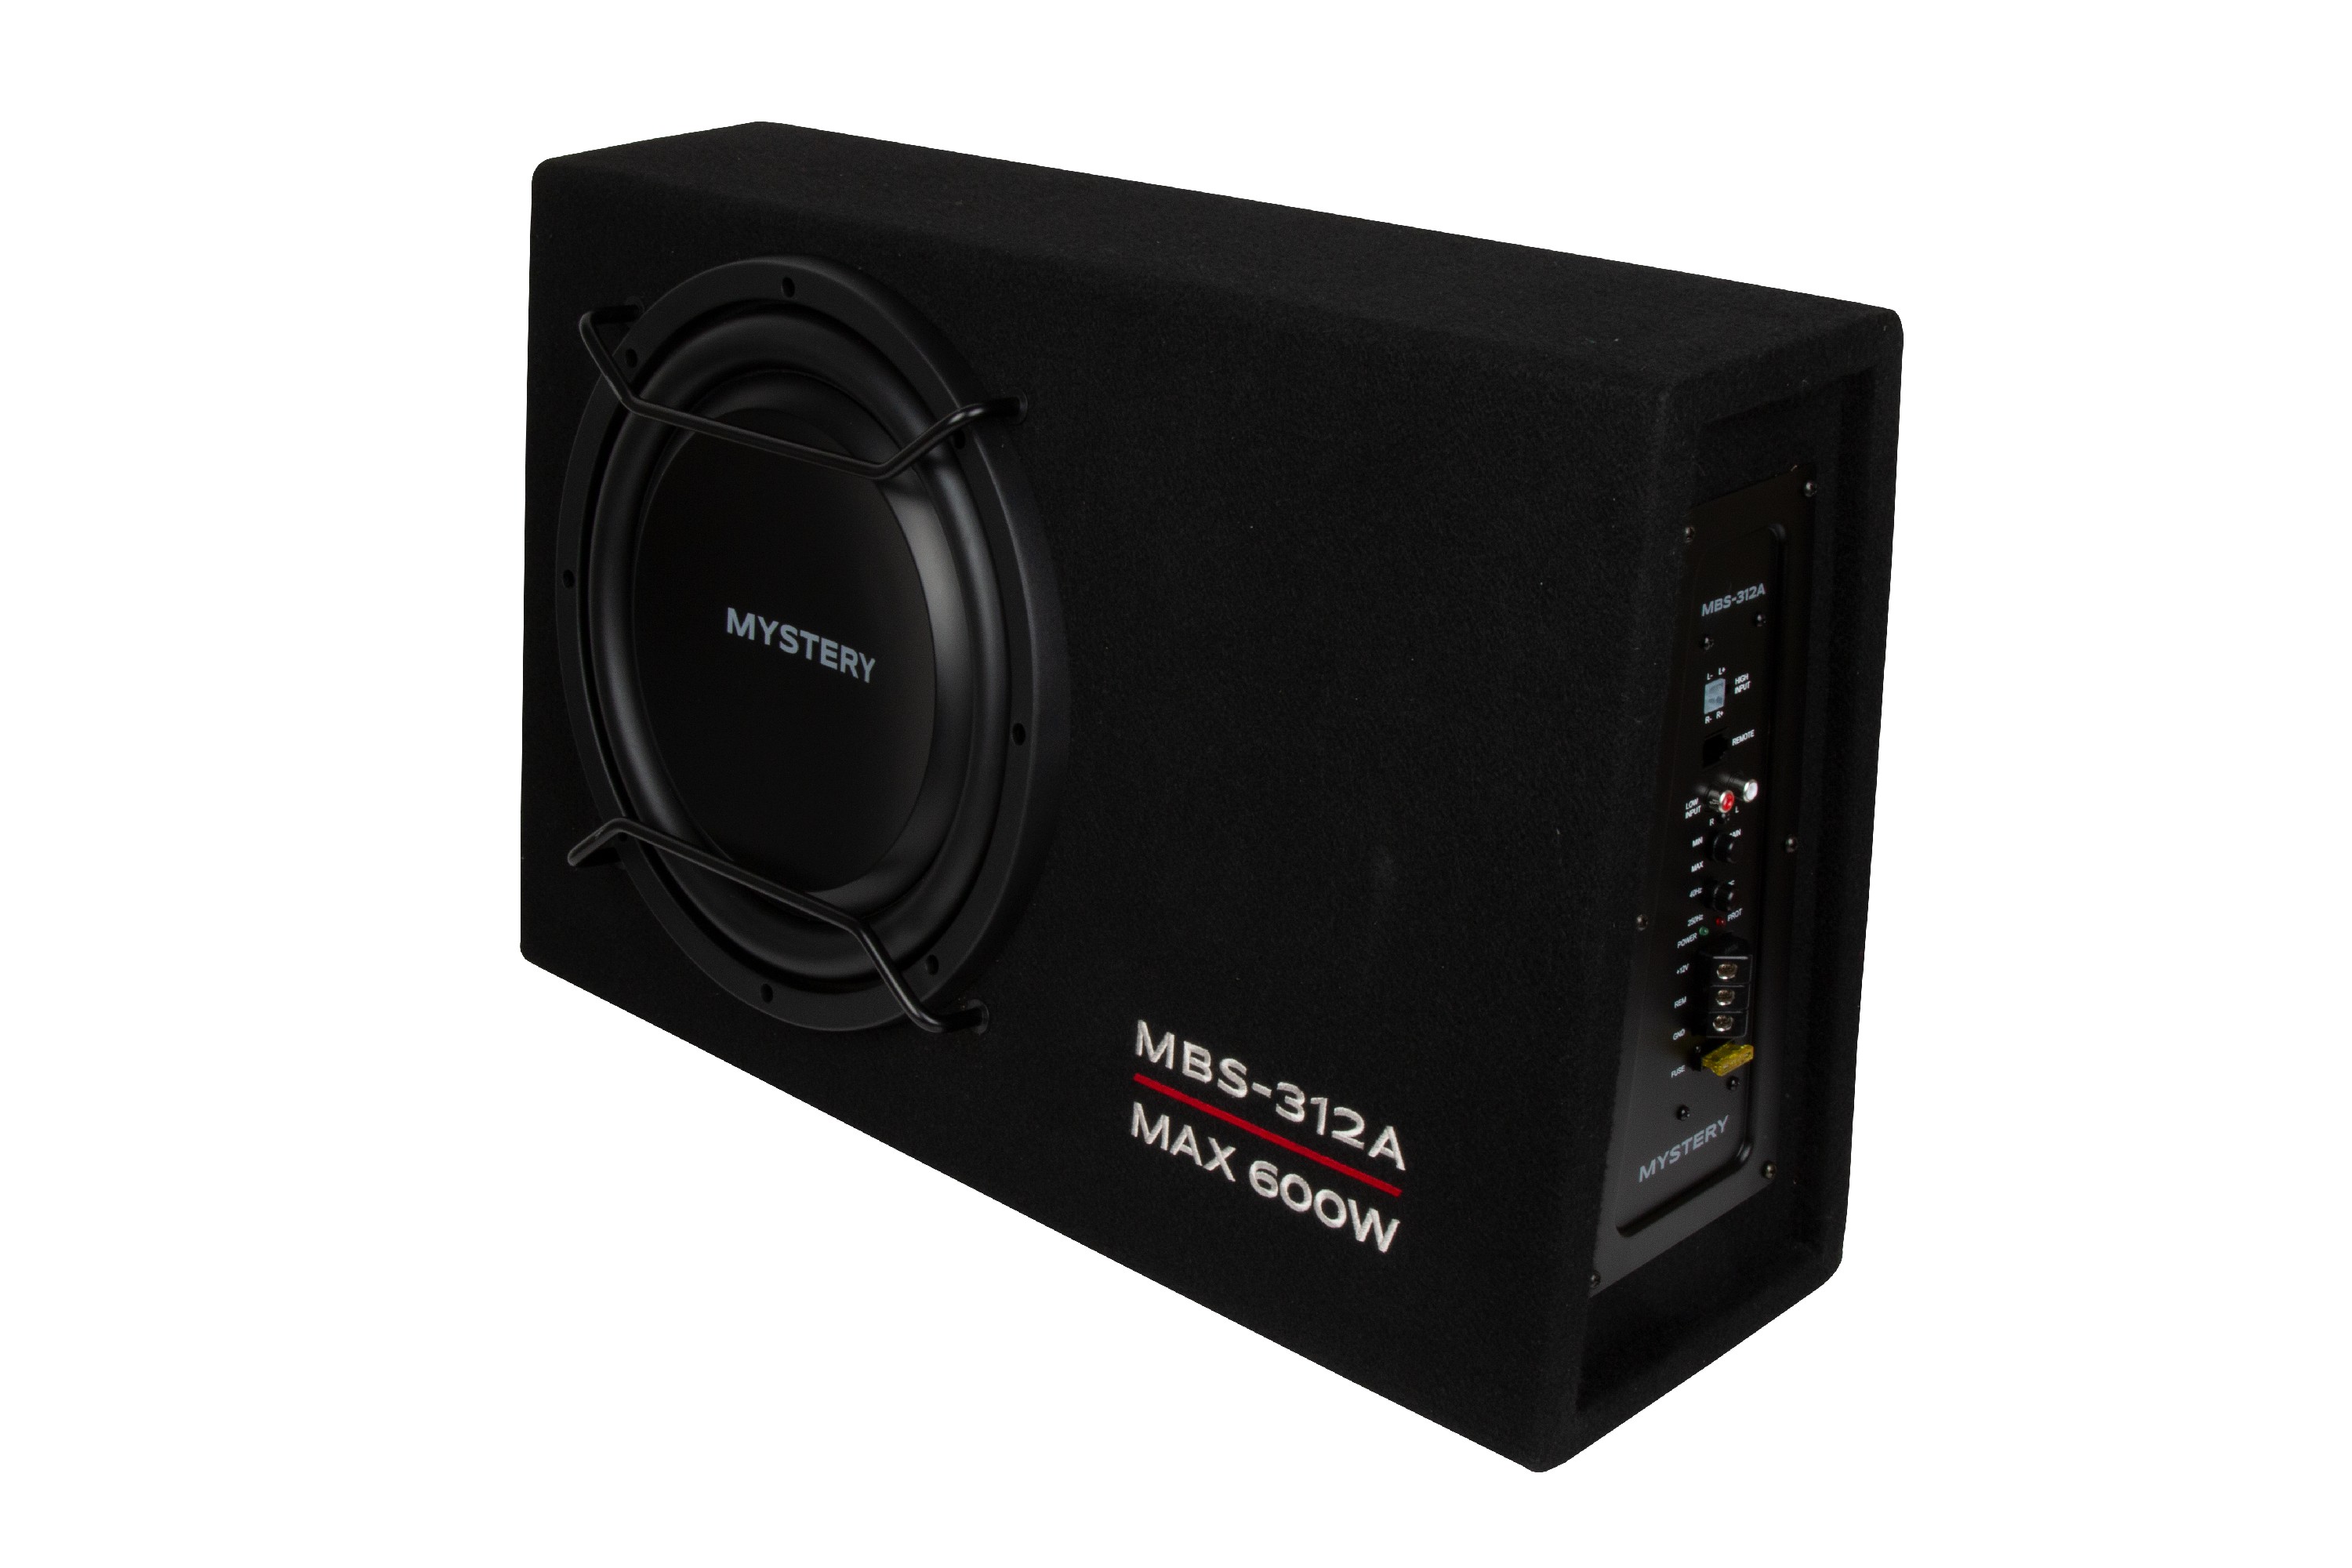 Car Subwoofer Mystery MBS-312A